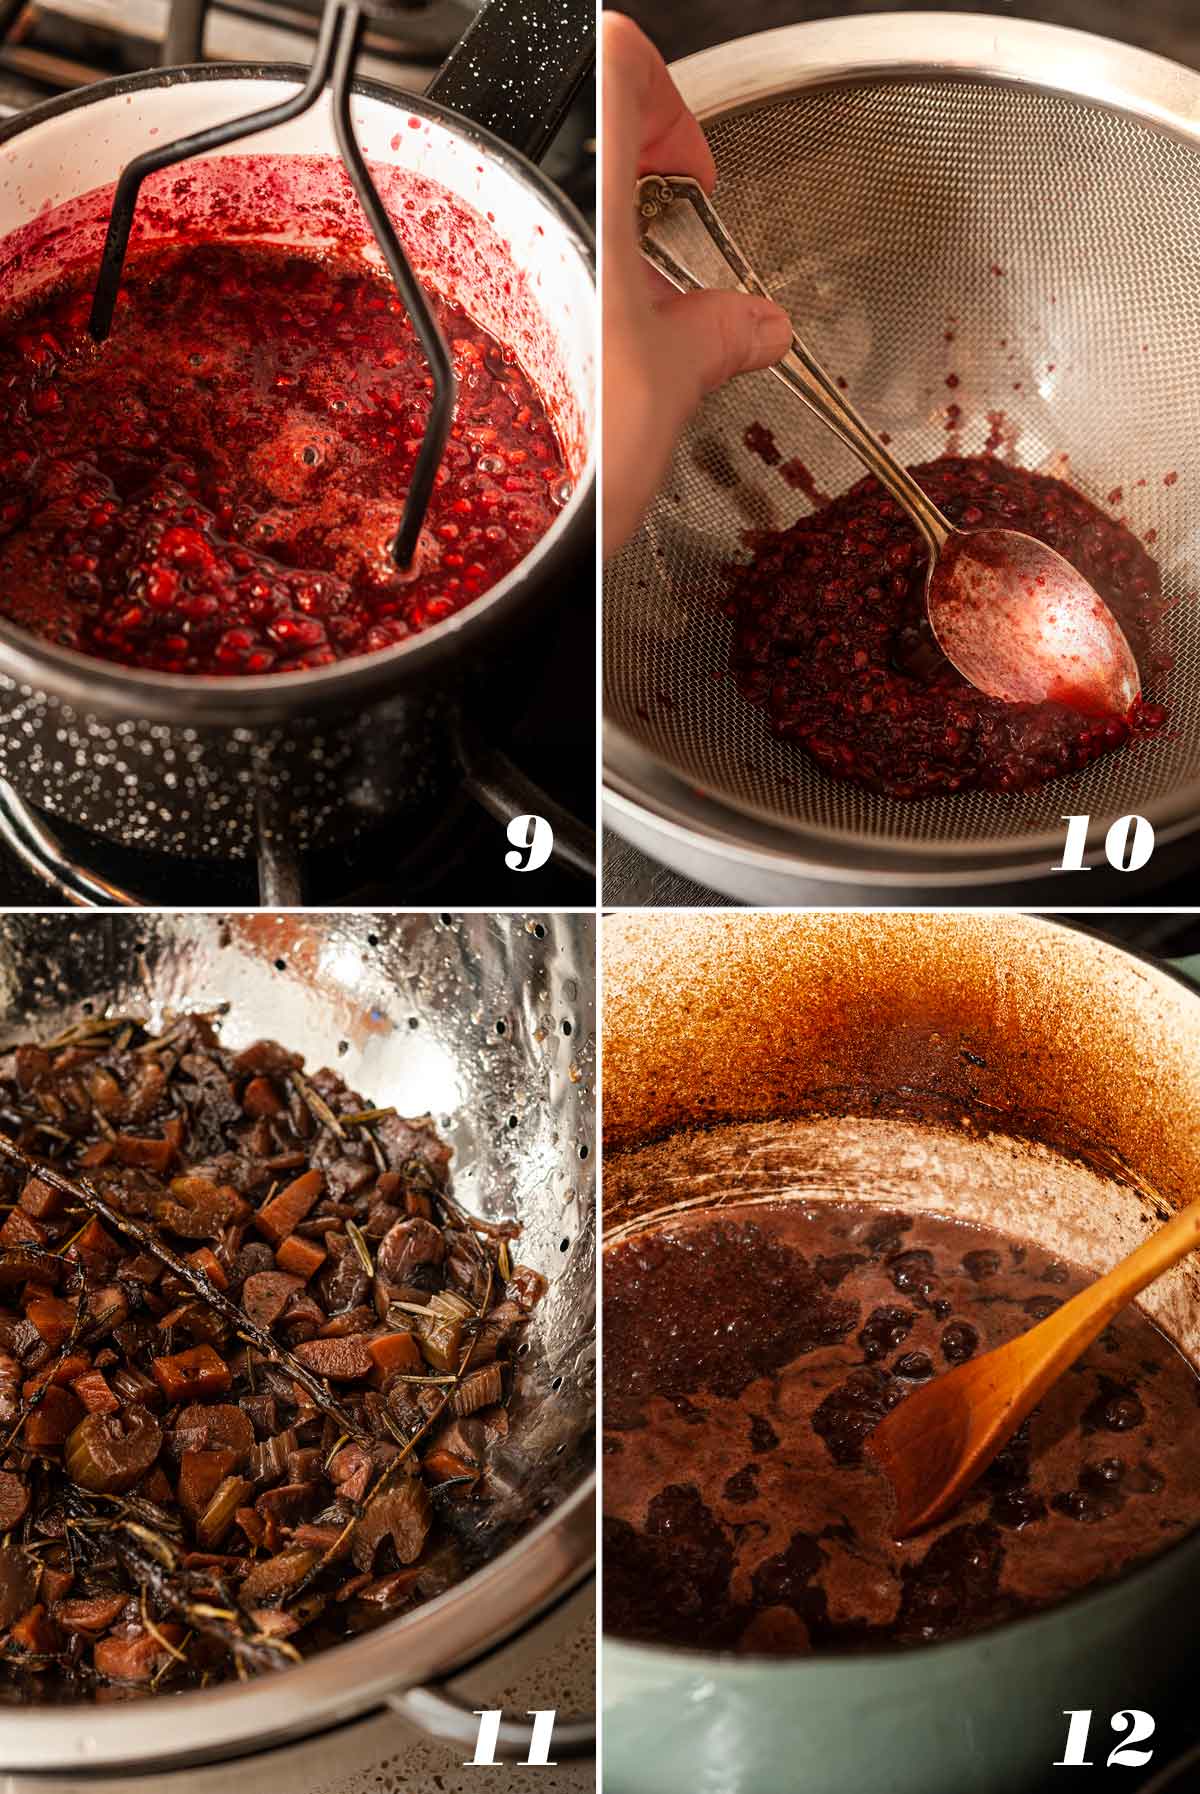 A collage of 4 numbered images showing how to make blackberry reduction and sauce.